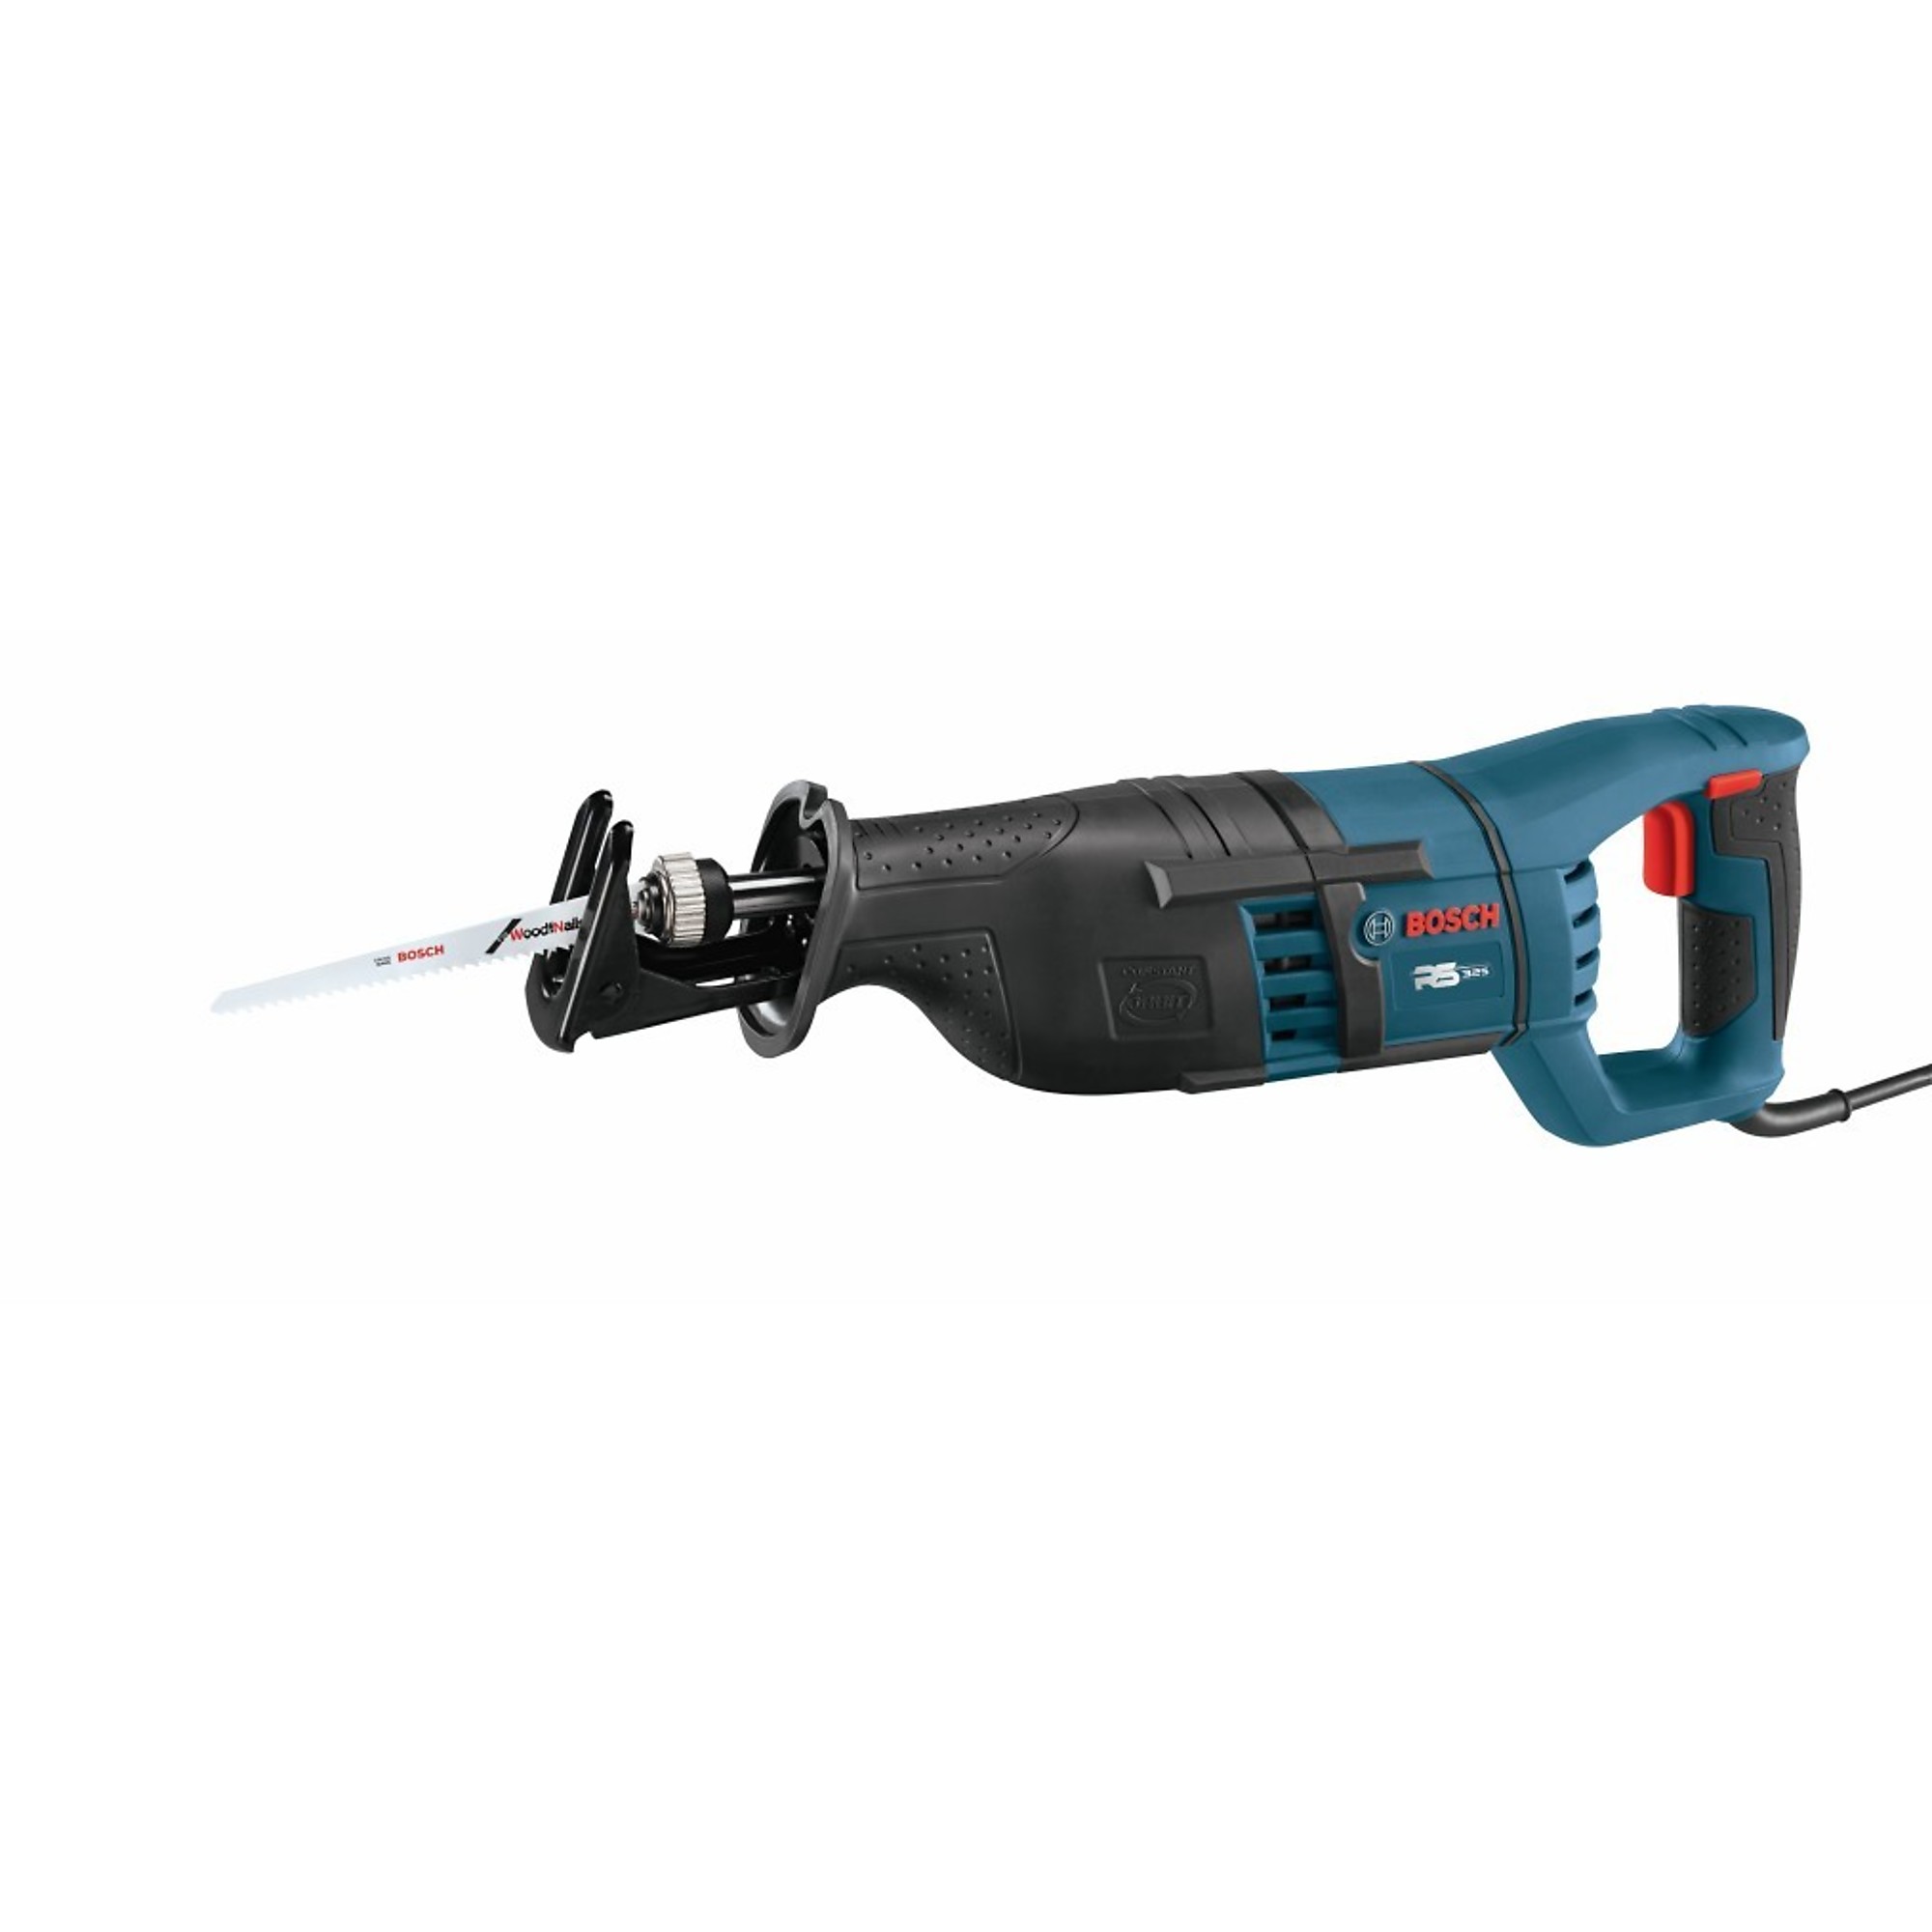 Bosch Compact Reciprocating Saw 12 Amp, 120 Volts, Model RS325